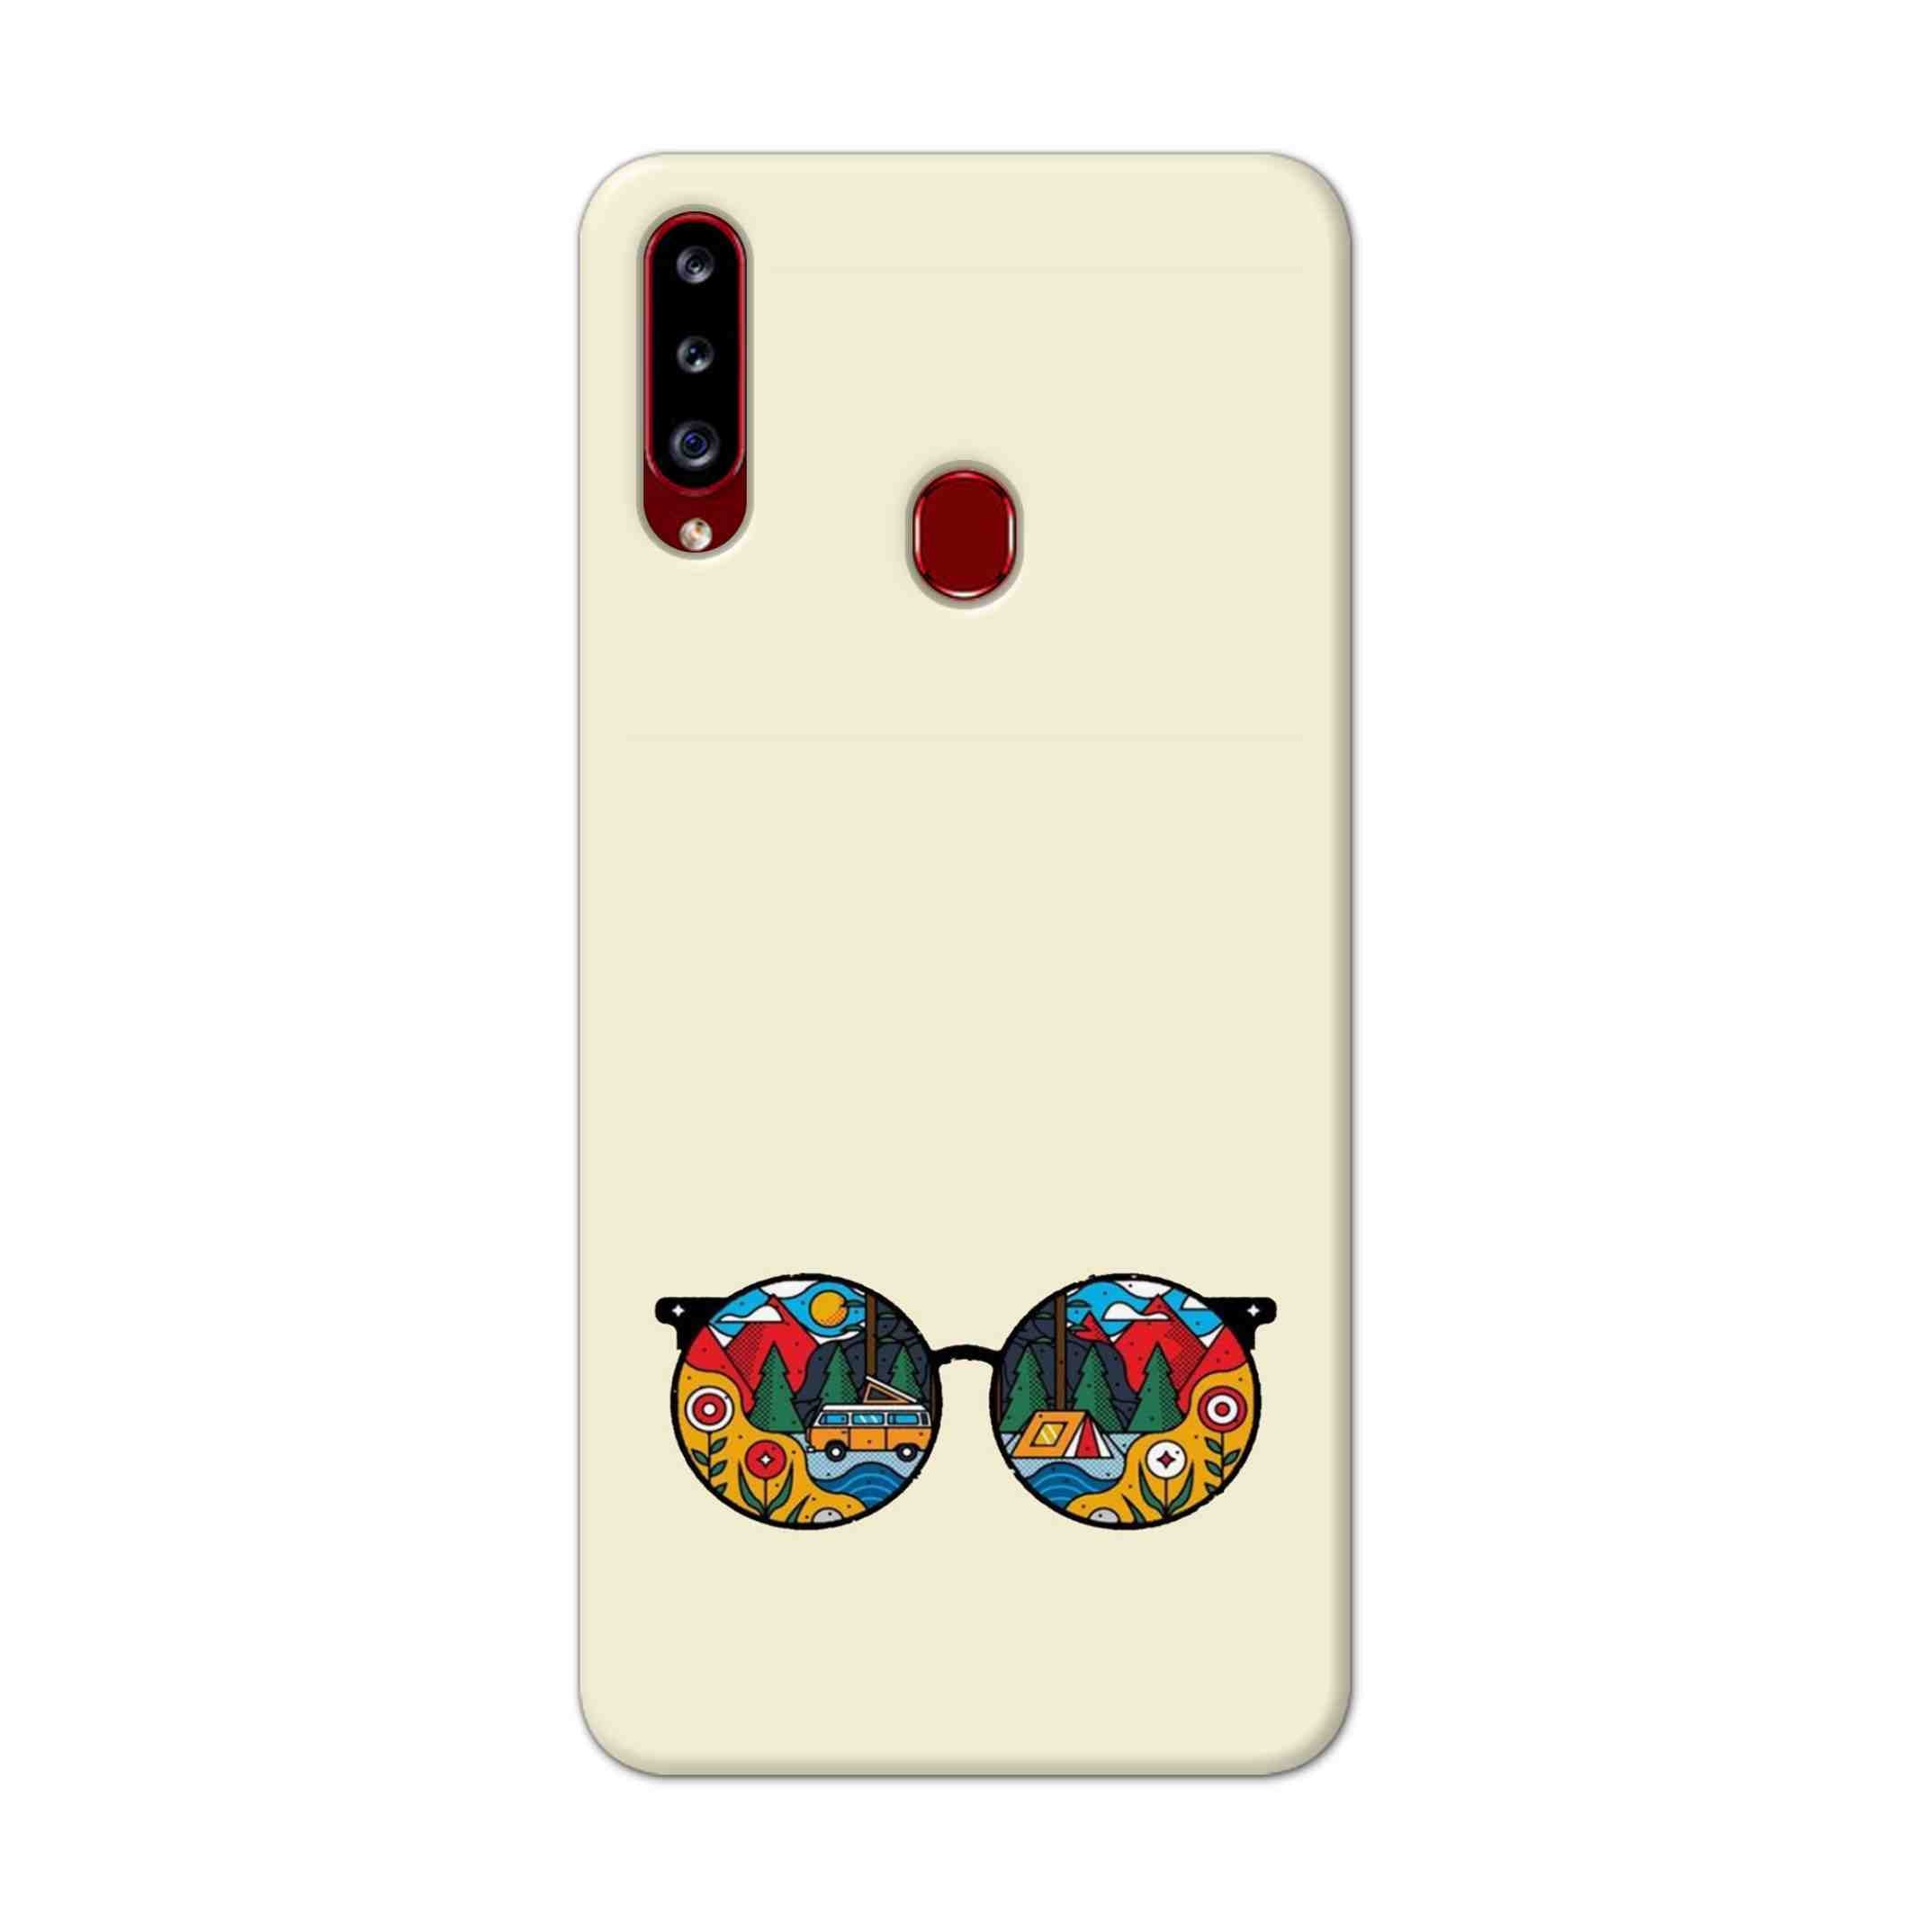 Buy Rainbow Sunglasses Hard Back Mobile Phone Case Cover For Samsung A20s Online